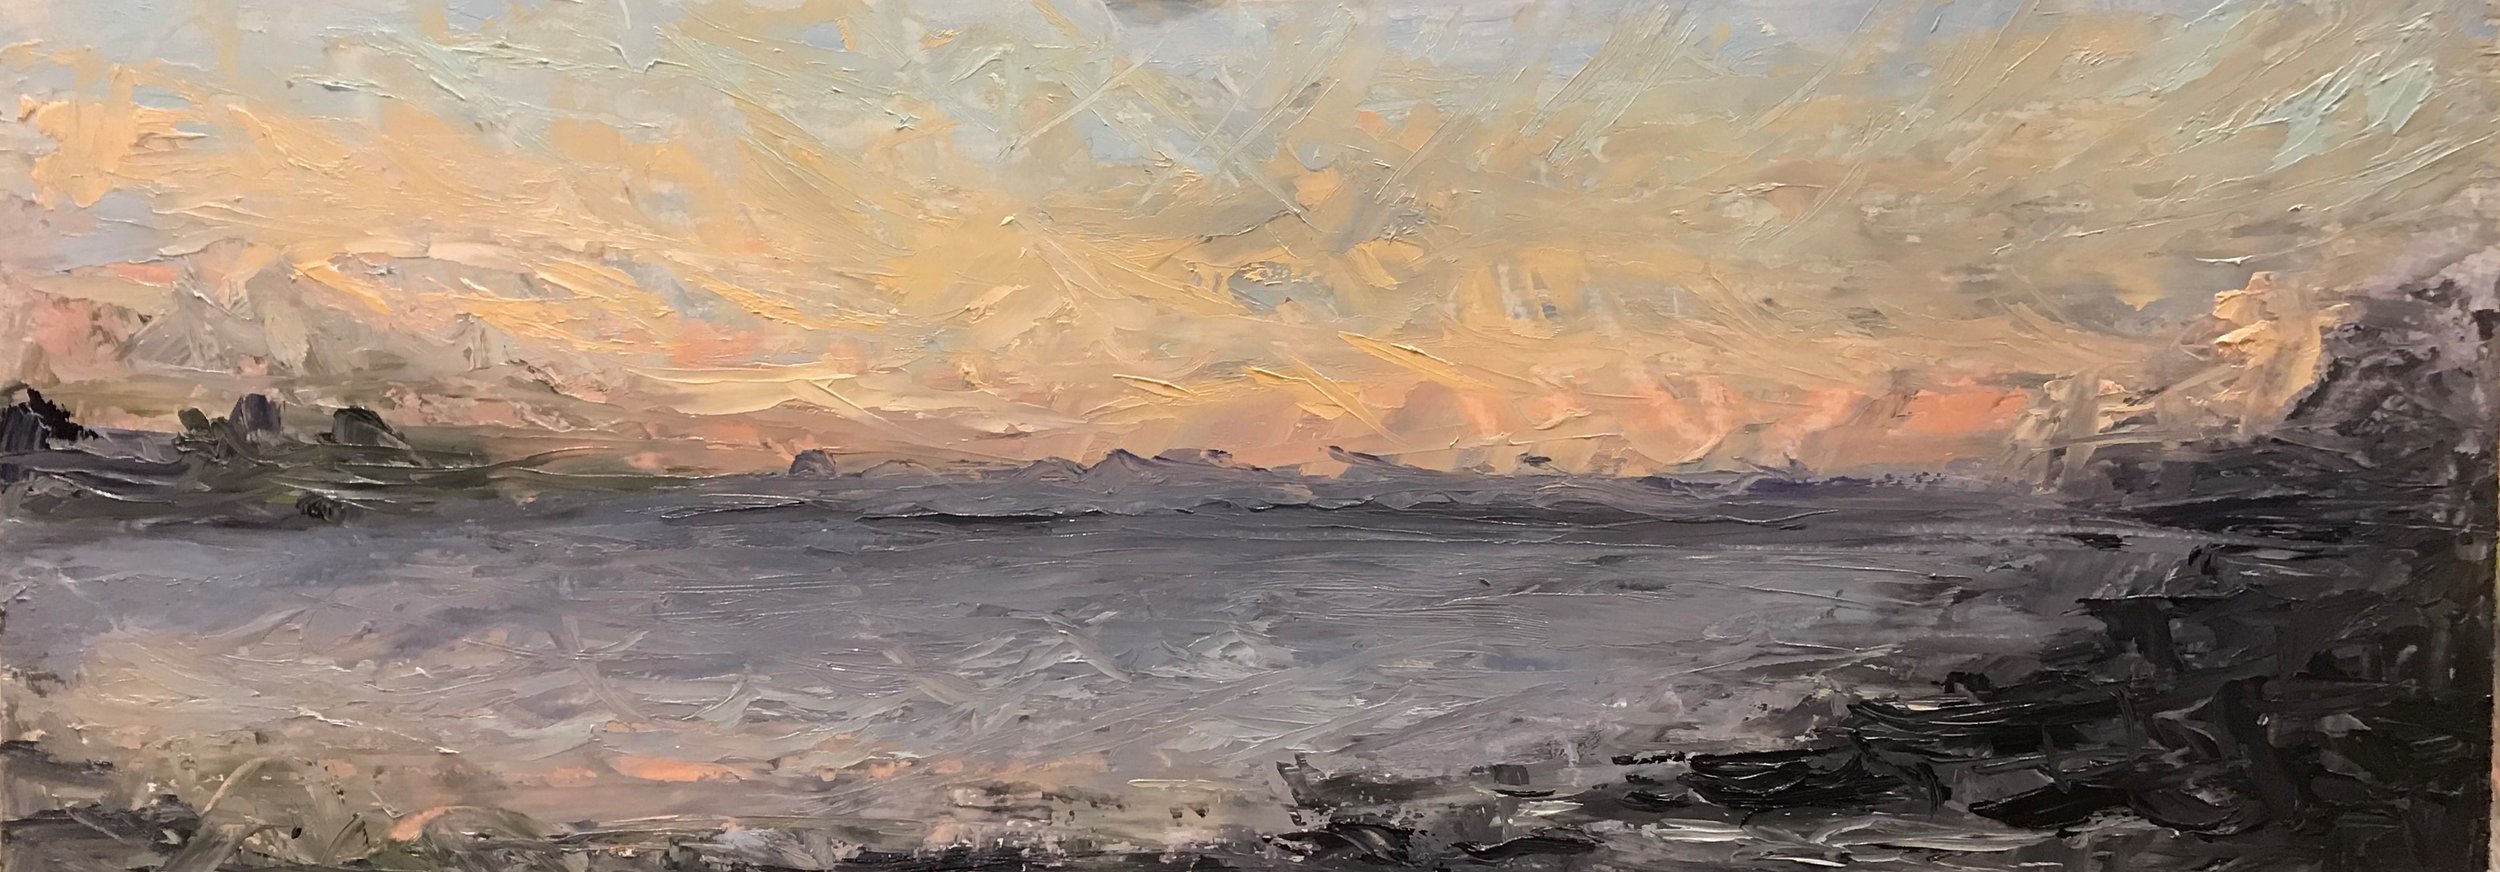 20-08-20 After Light at Shell Beach  OIl on Panel  9 x 24 inches.jpg